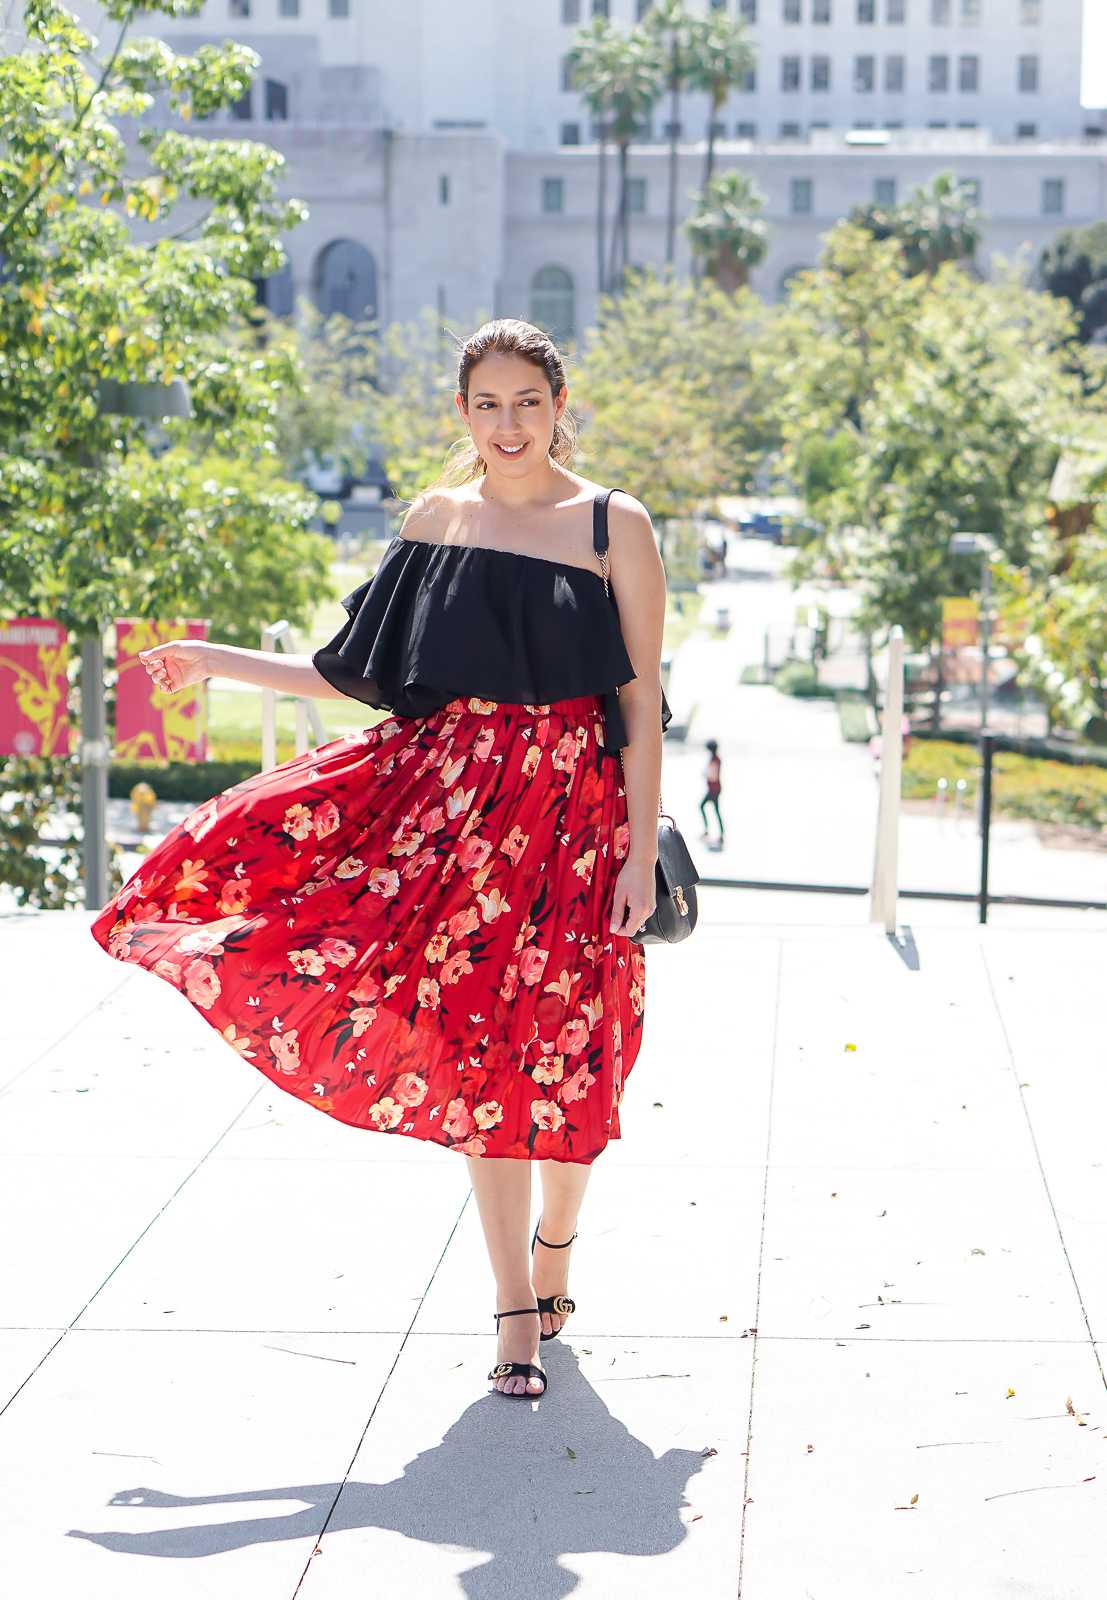 H&M Red Floral Midi Skirt, Red Floral Midi Skirt, Red H&M Skirt, Black Gucci Marmont Sandals, Black Gucci Suede GG Logo Sandals, Black Suede Marmont Sandals, Gucci Marmont 75mm black Suede Sandals, Downtown Los Angeles Photography, City Hall Photography